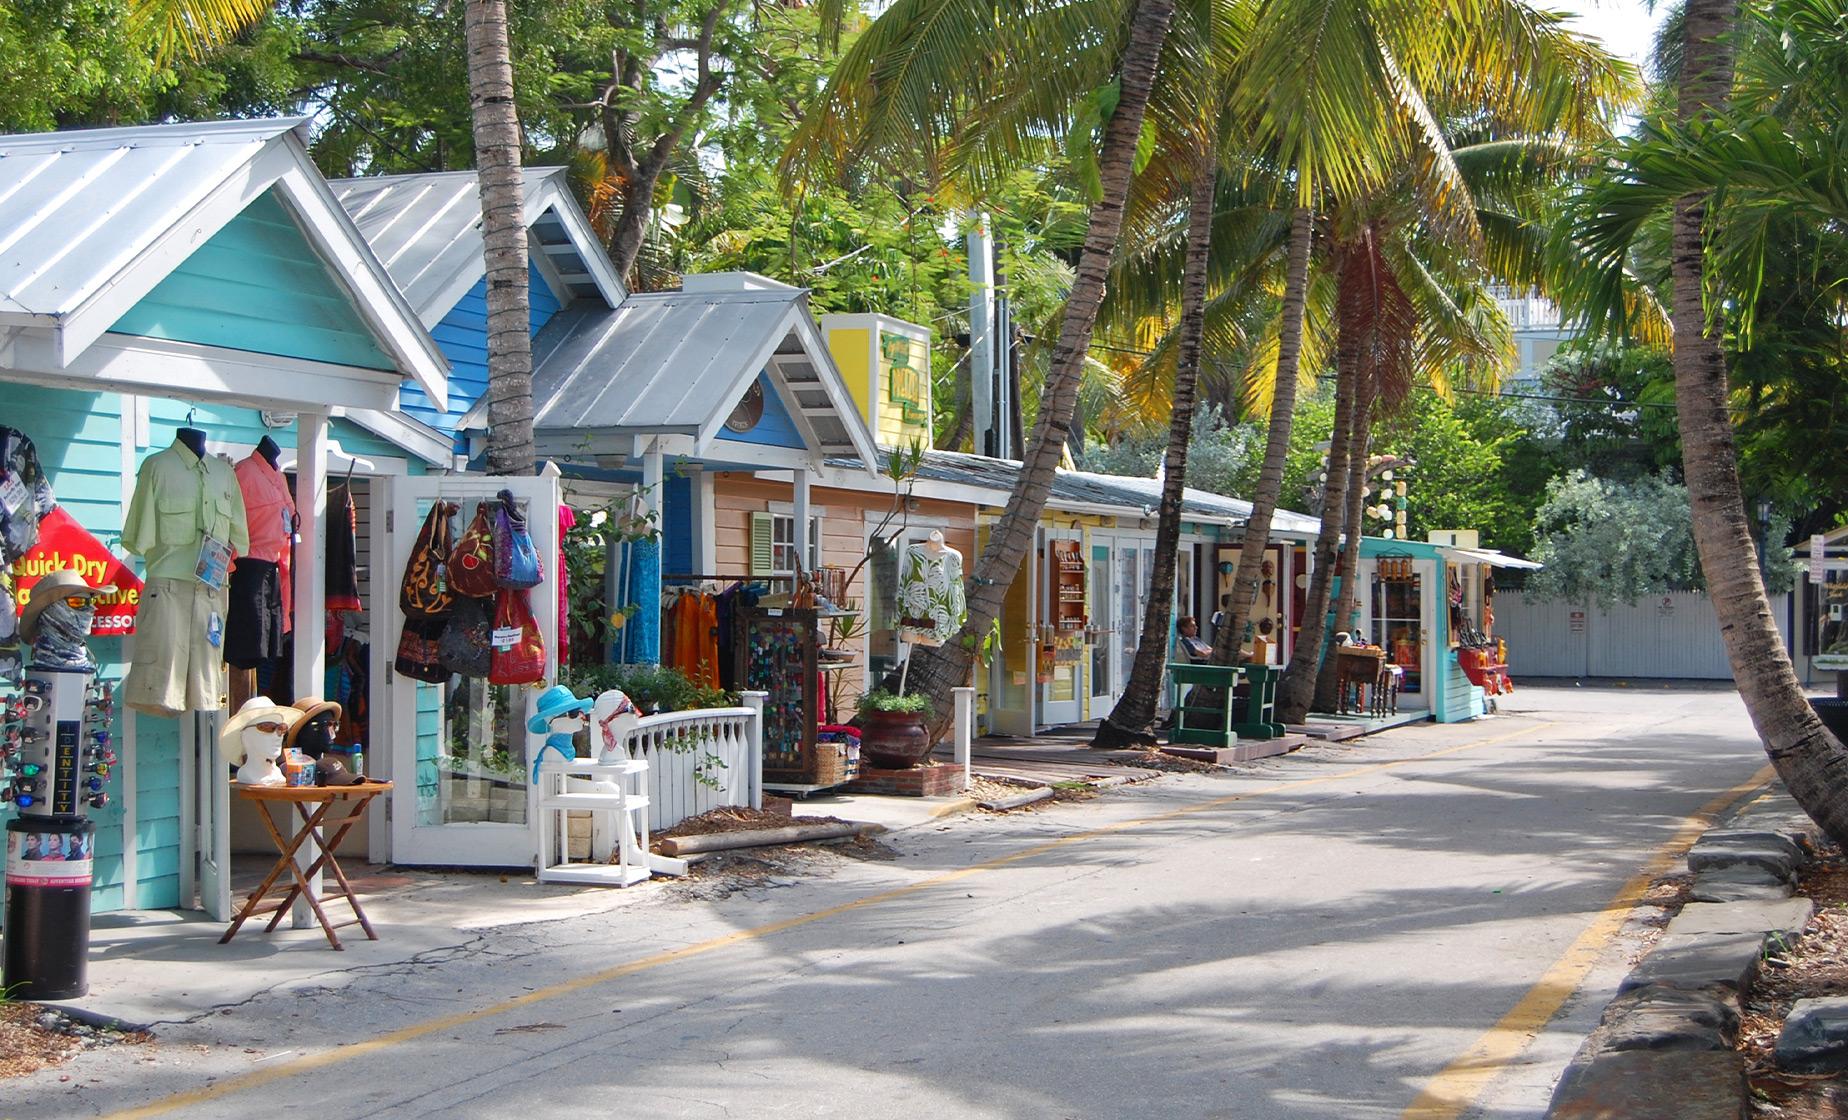 Amazing Scavenger Hunt in Key West (Historic Seaport, Duval Street, Mallory Square)